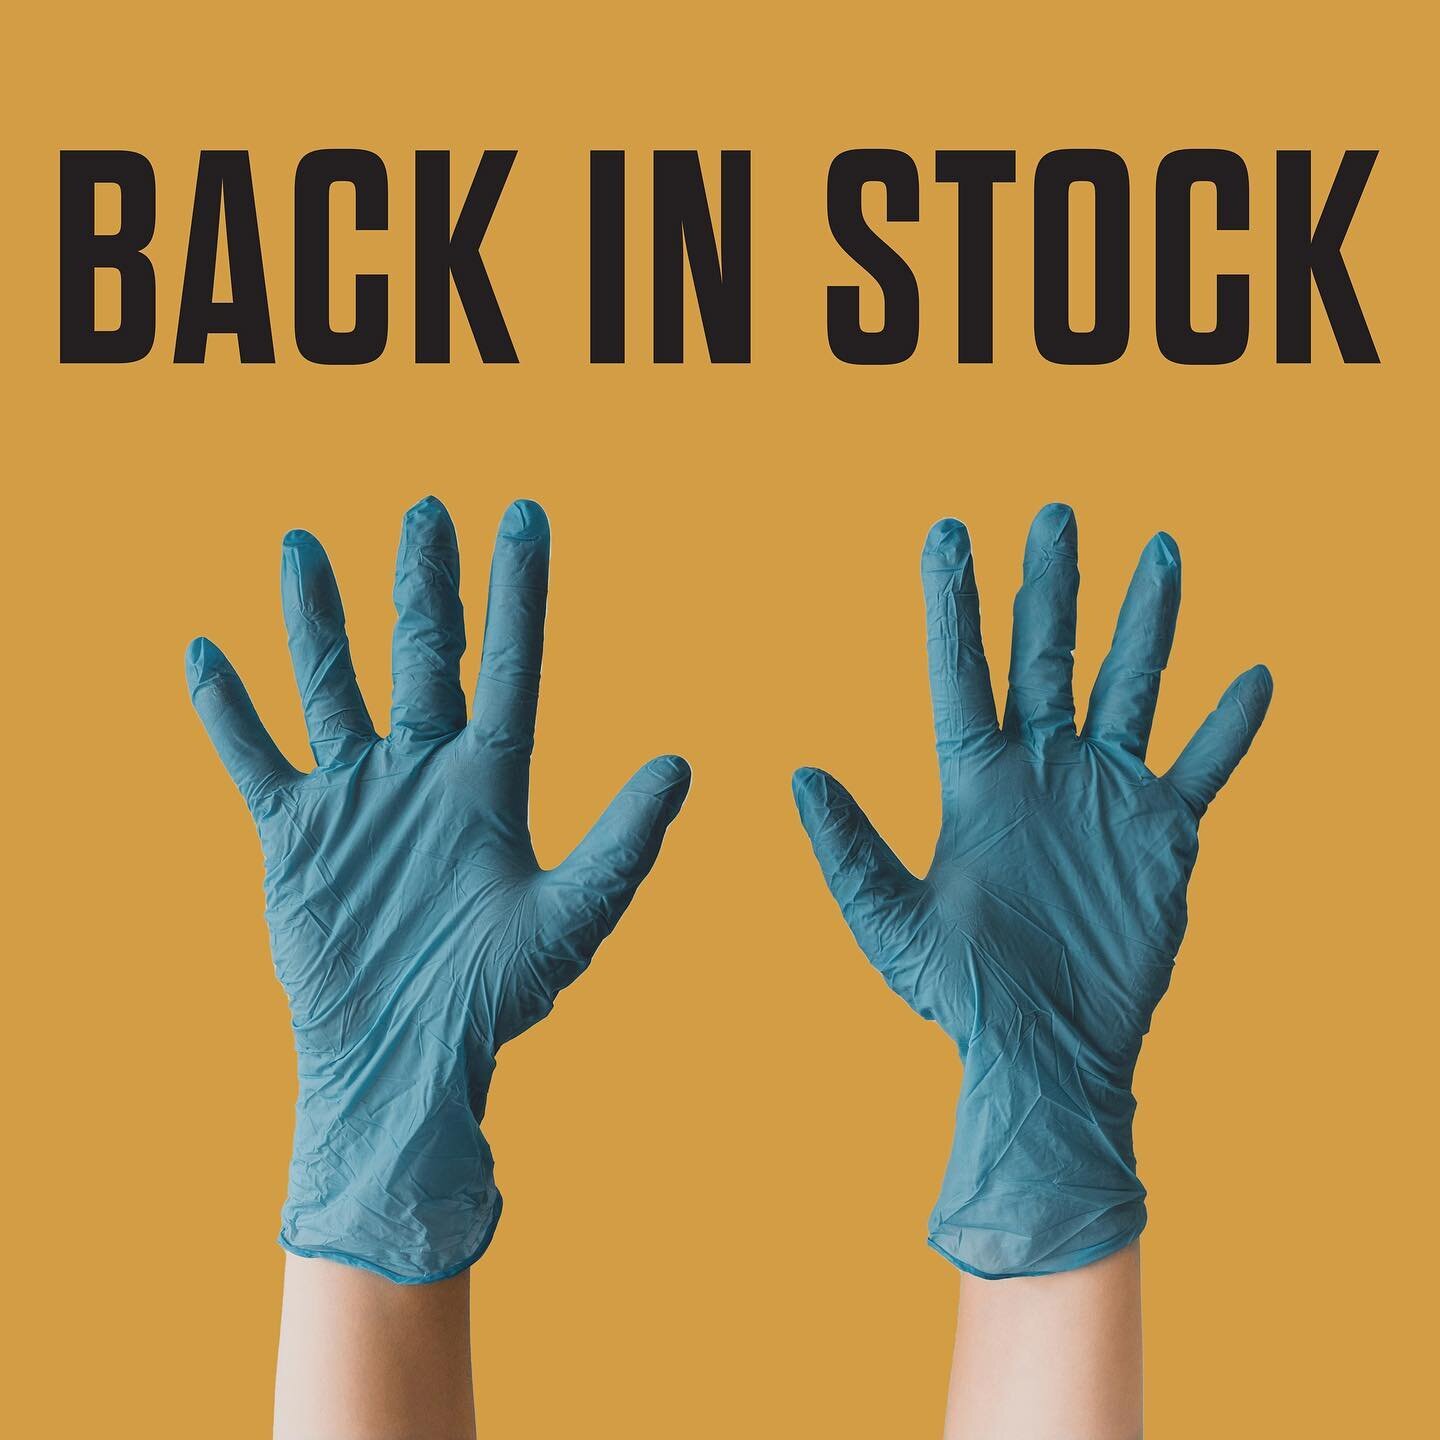 Due to COVID latex and vinyl gloves had been unavailable from our supplier.  They are now back in stock and ready for your studios.  Stop by our SoHo location to shop.
.
.
.
#latexgloves #vinylgloves #studioprotection #artist #nycartist #sohoartmater